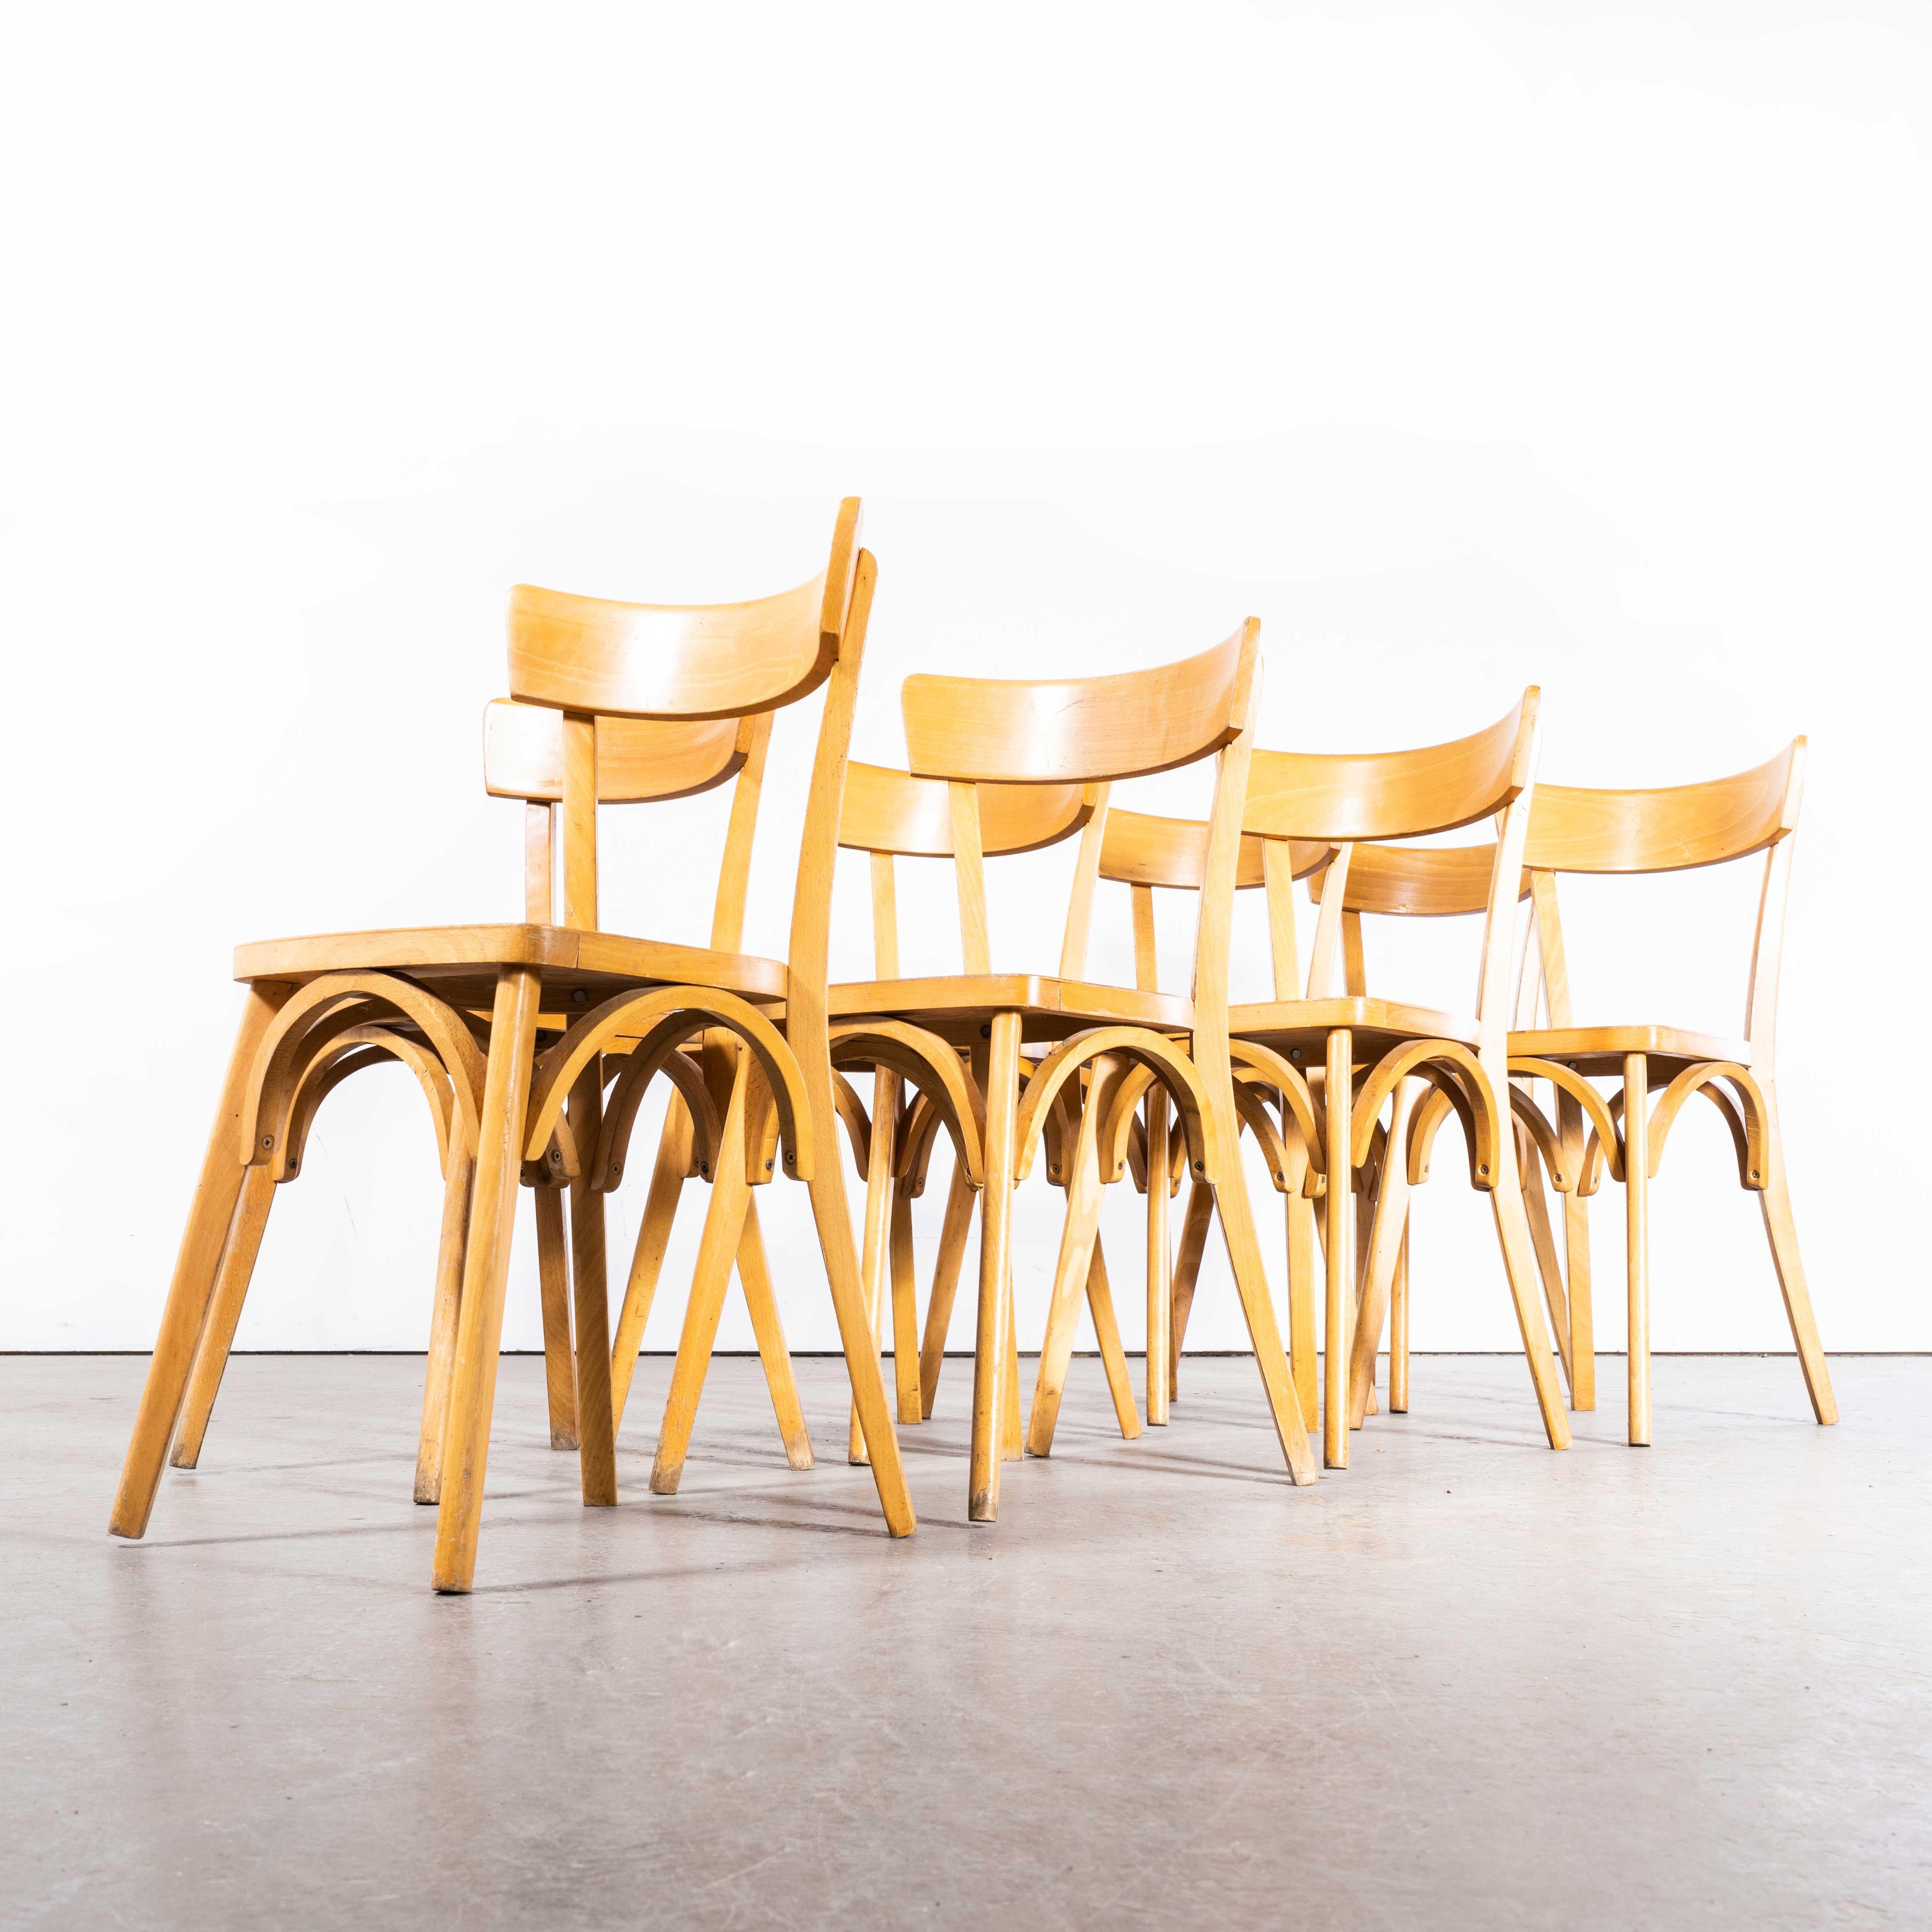 1950s French Baumann Blonde Beech Bentwood Dining Chairs – Set Of Eight

1950s French Baumann Blonde Beech Bentwood Dining Chairs – Set Of Eight. Baumann is a slightly off the radar French producer just starting to gain traction in the market.